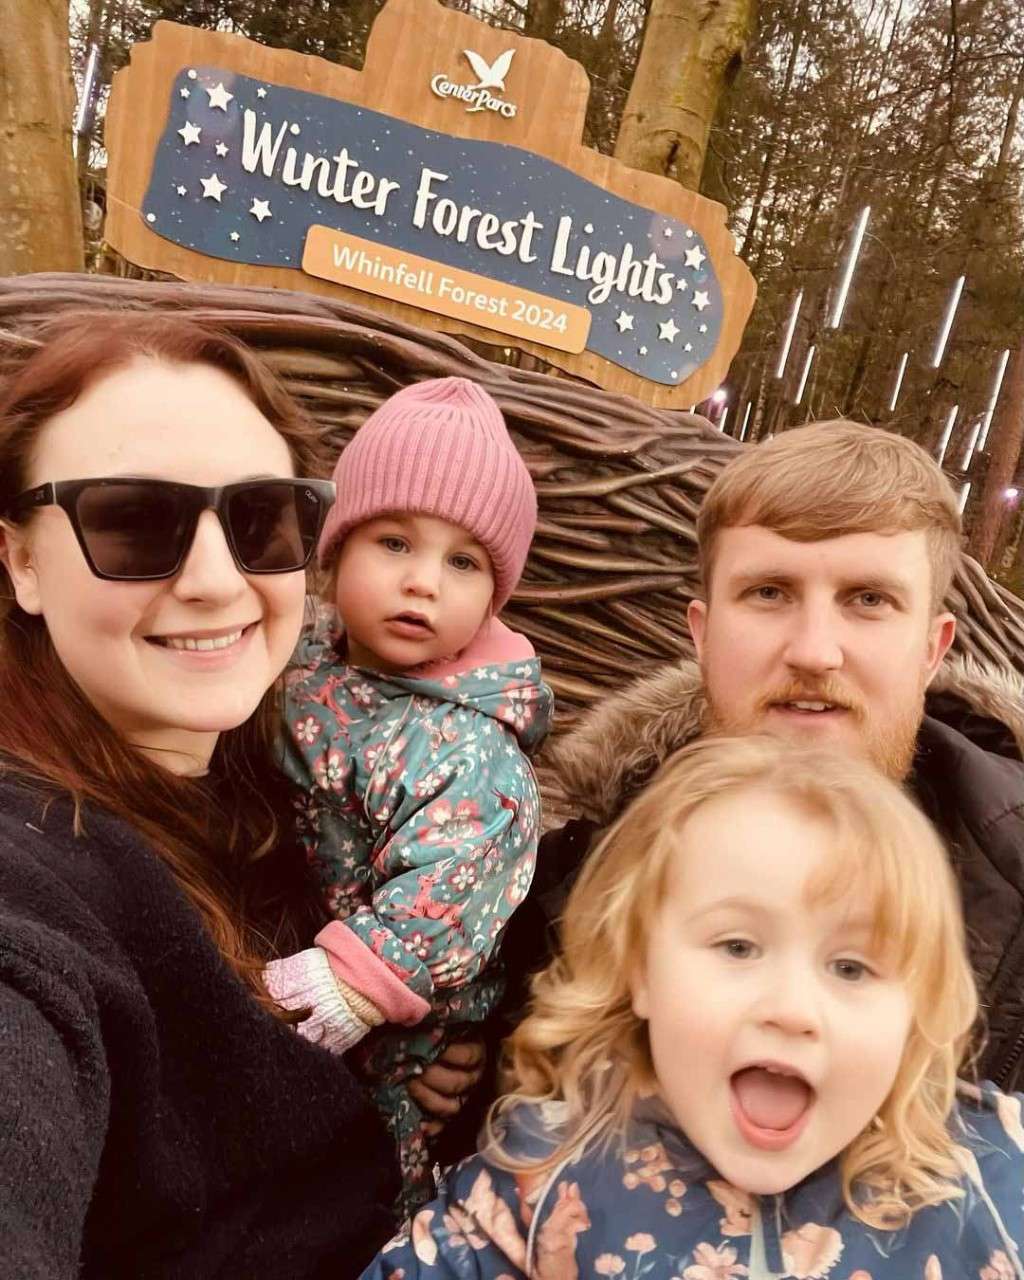 A family taking a selfie in front of the winter forest lights sign.